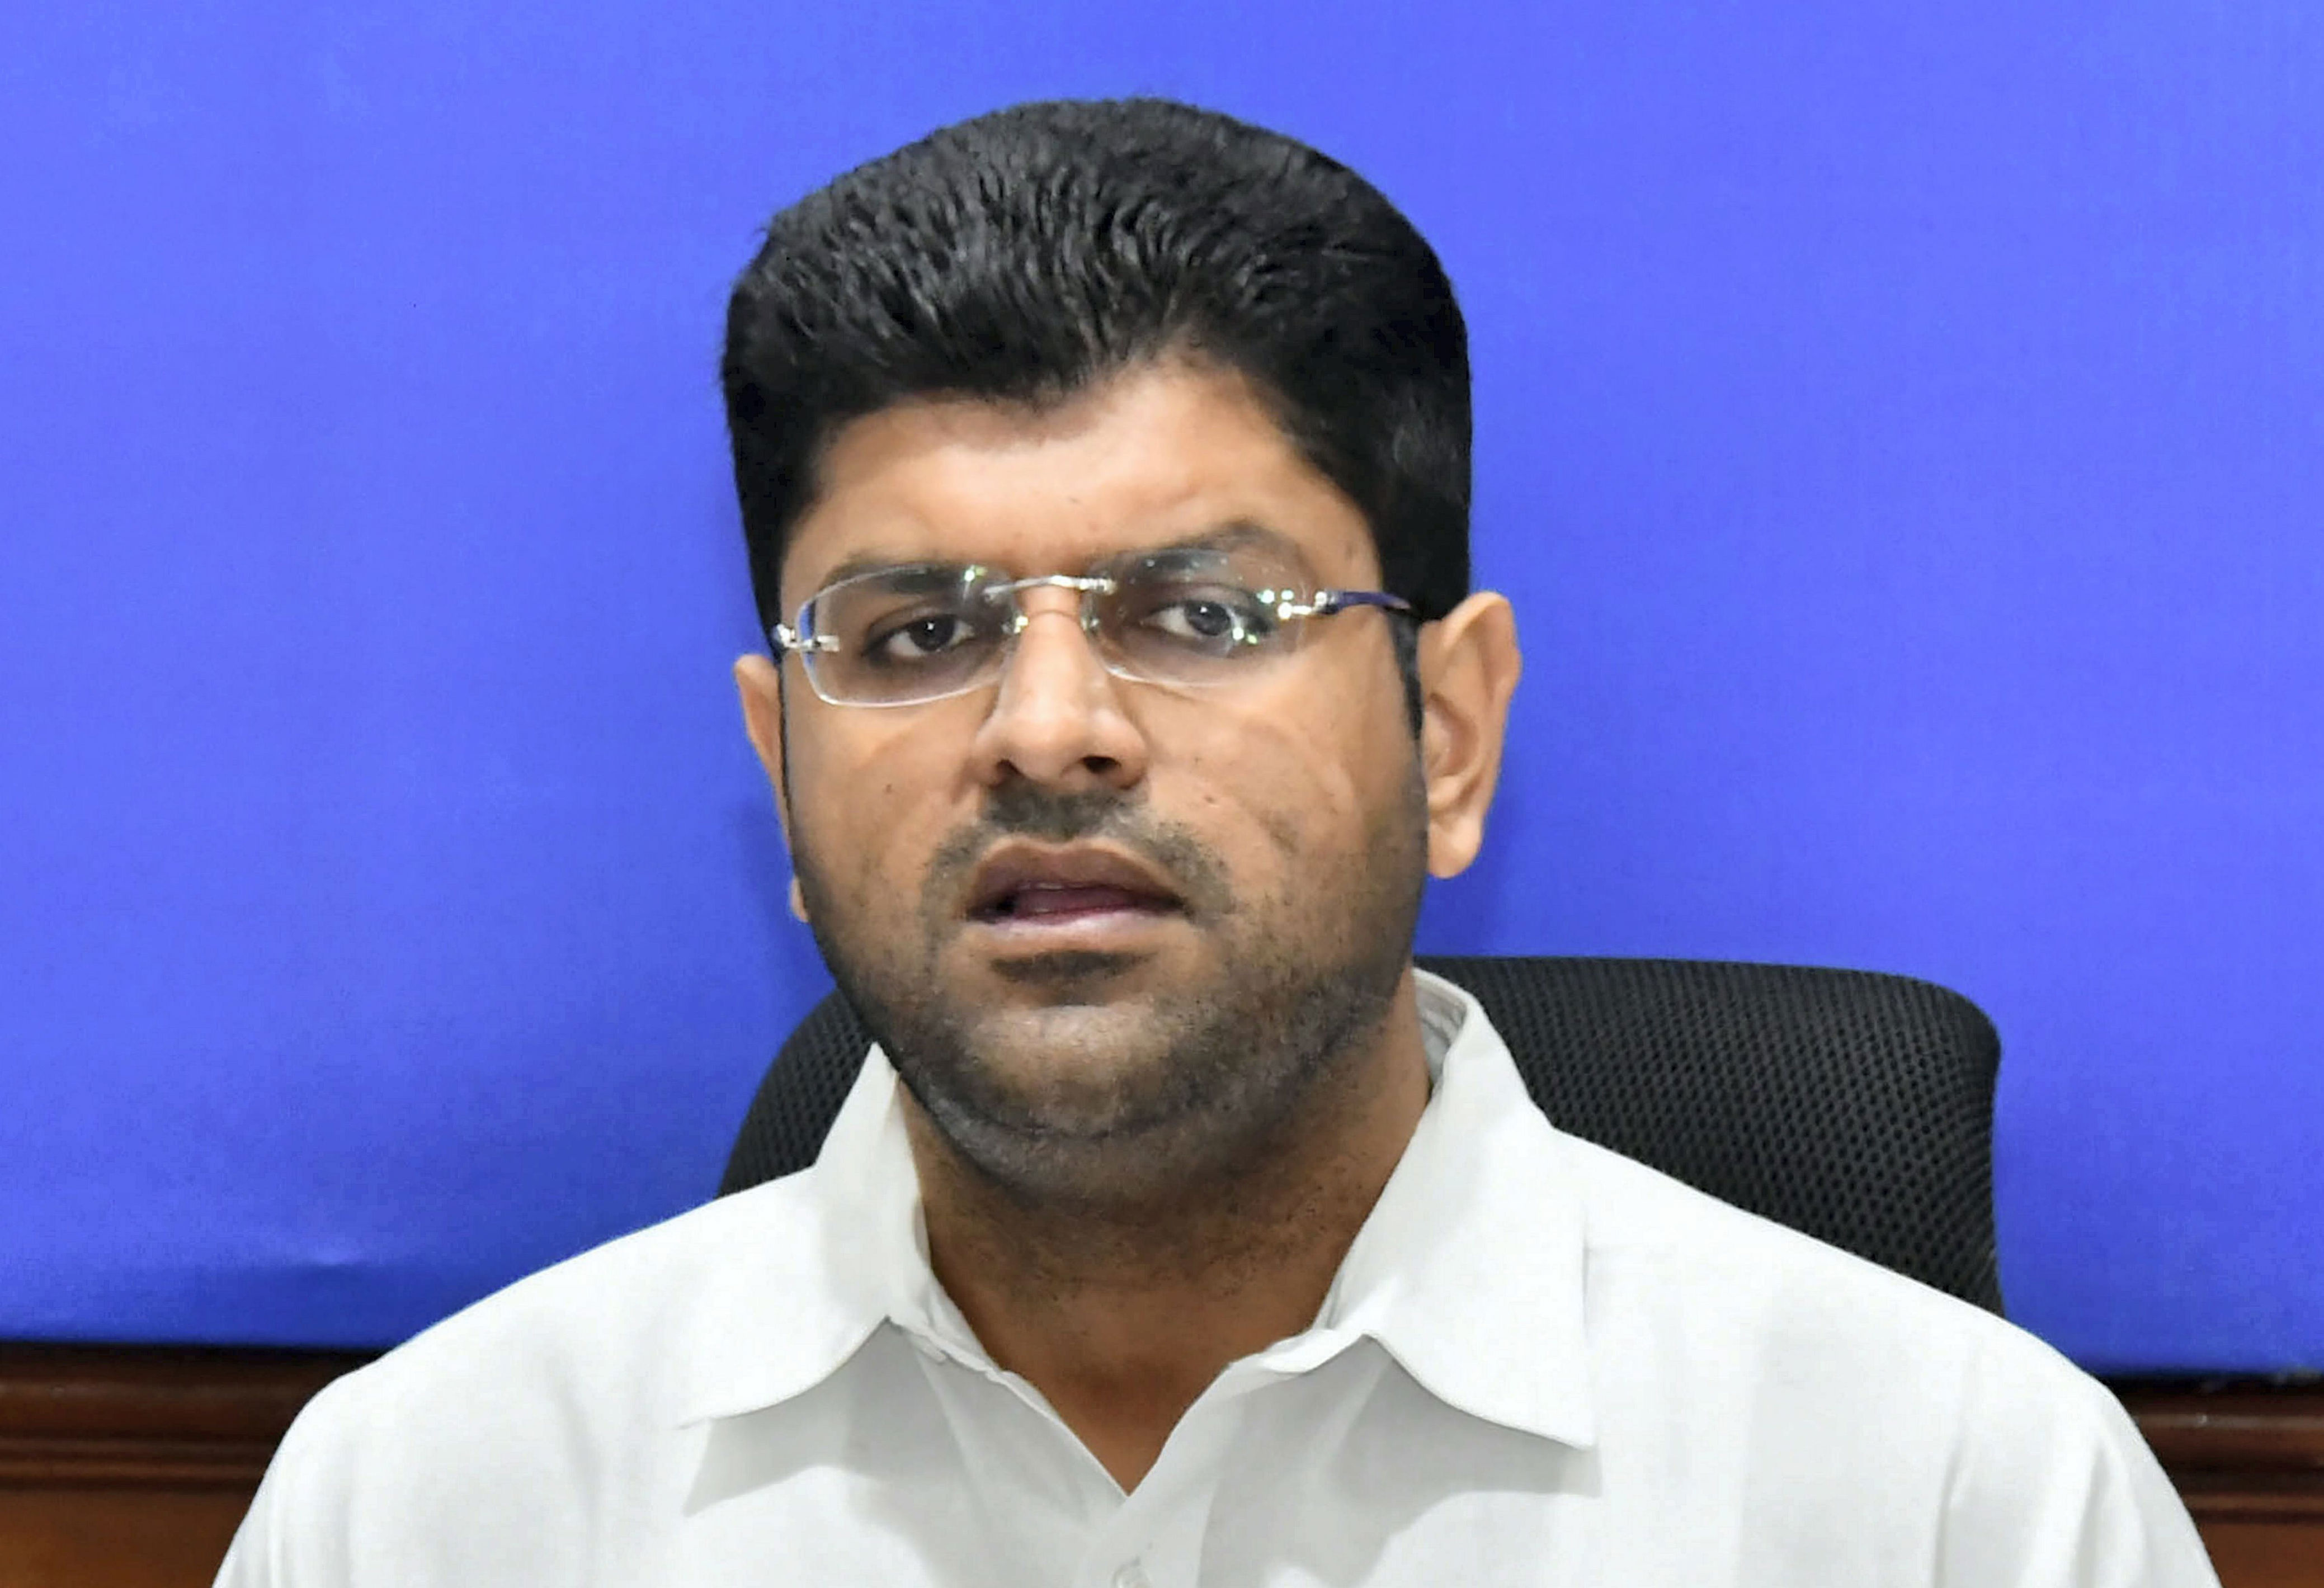 if cong takes steps to bring down saini govt, we will support: dushyant chautala